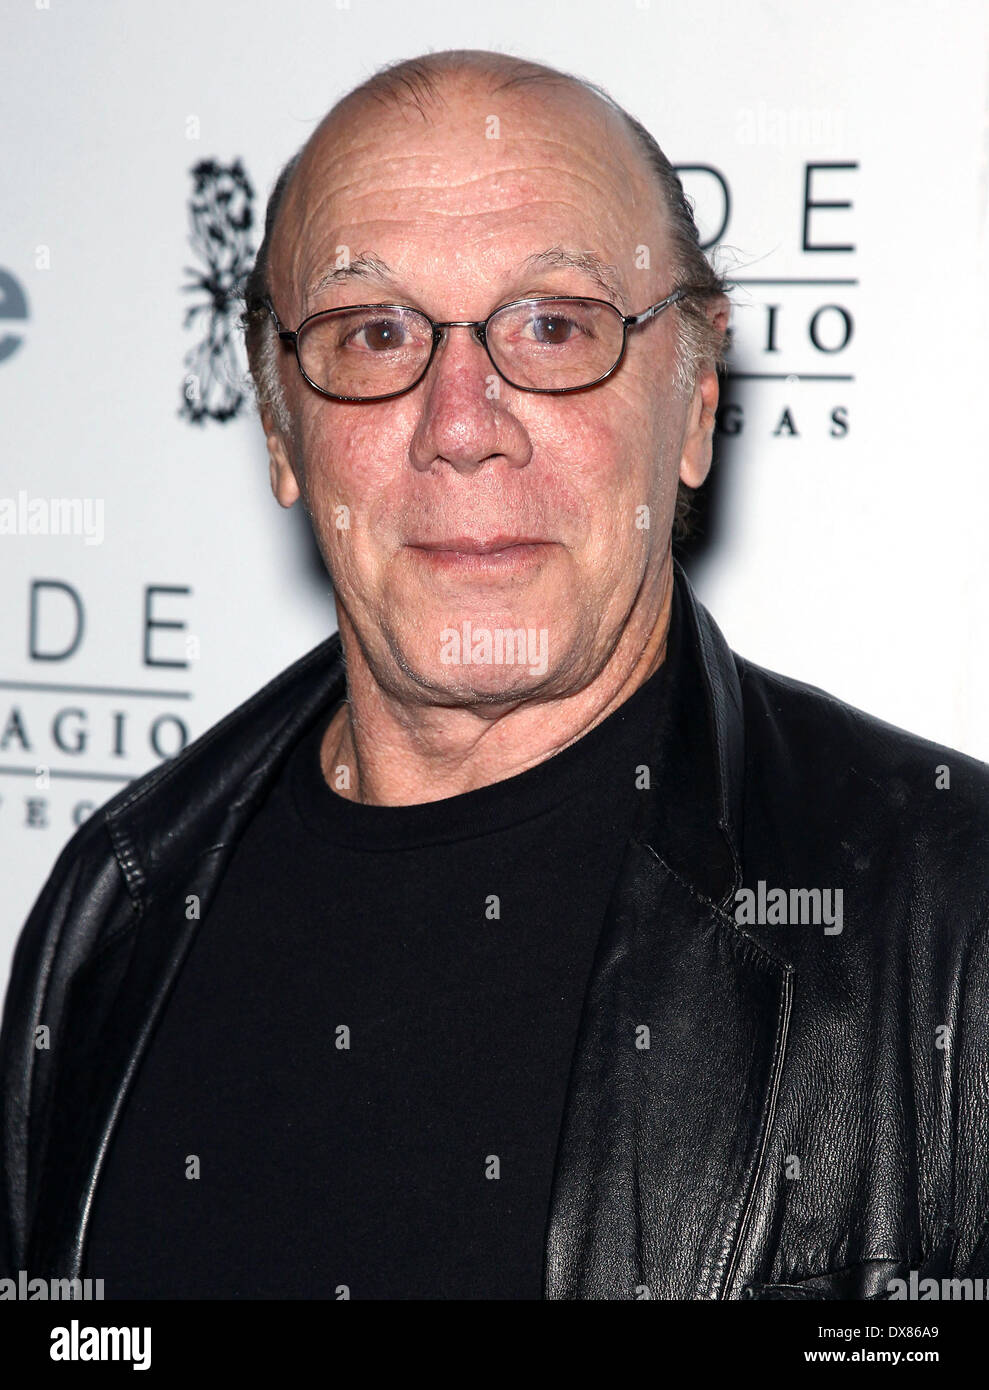 Dayton Callie Charlie Hunnam celebrates Fifth Season of Sons of Anarchy at Hyde Bellagio Las Vegas, Nevada - 10.11.12 Featuring Stock Photo